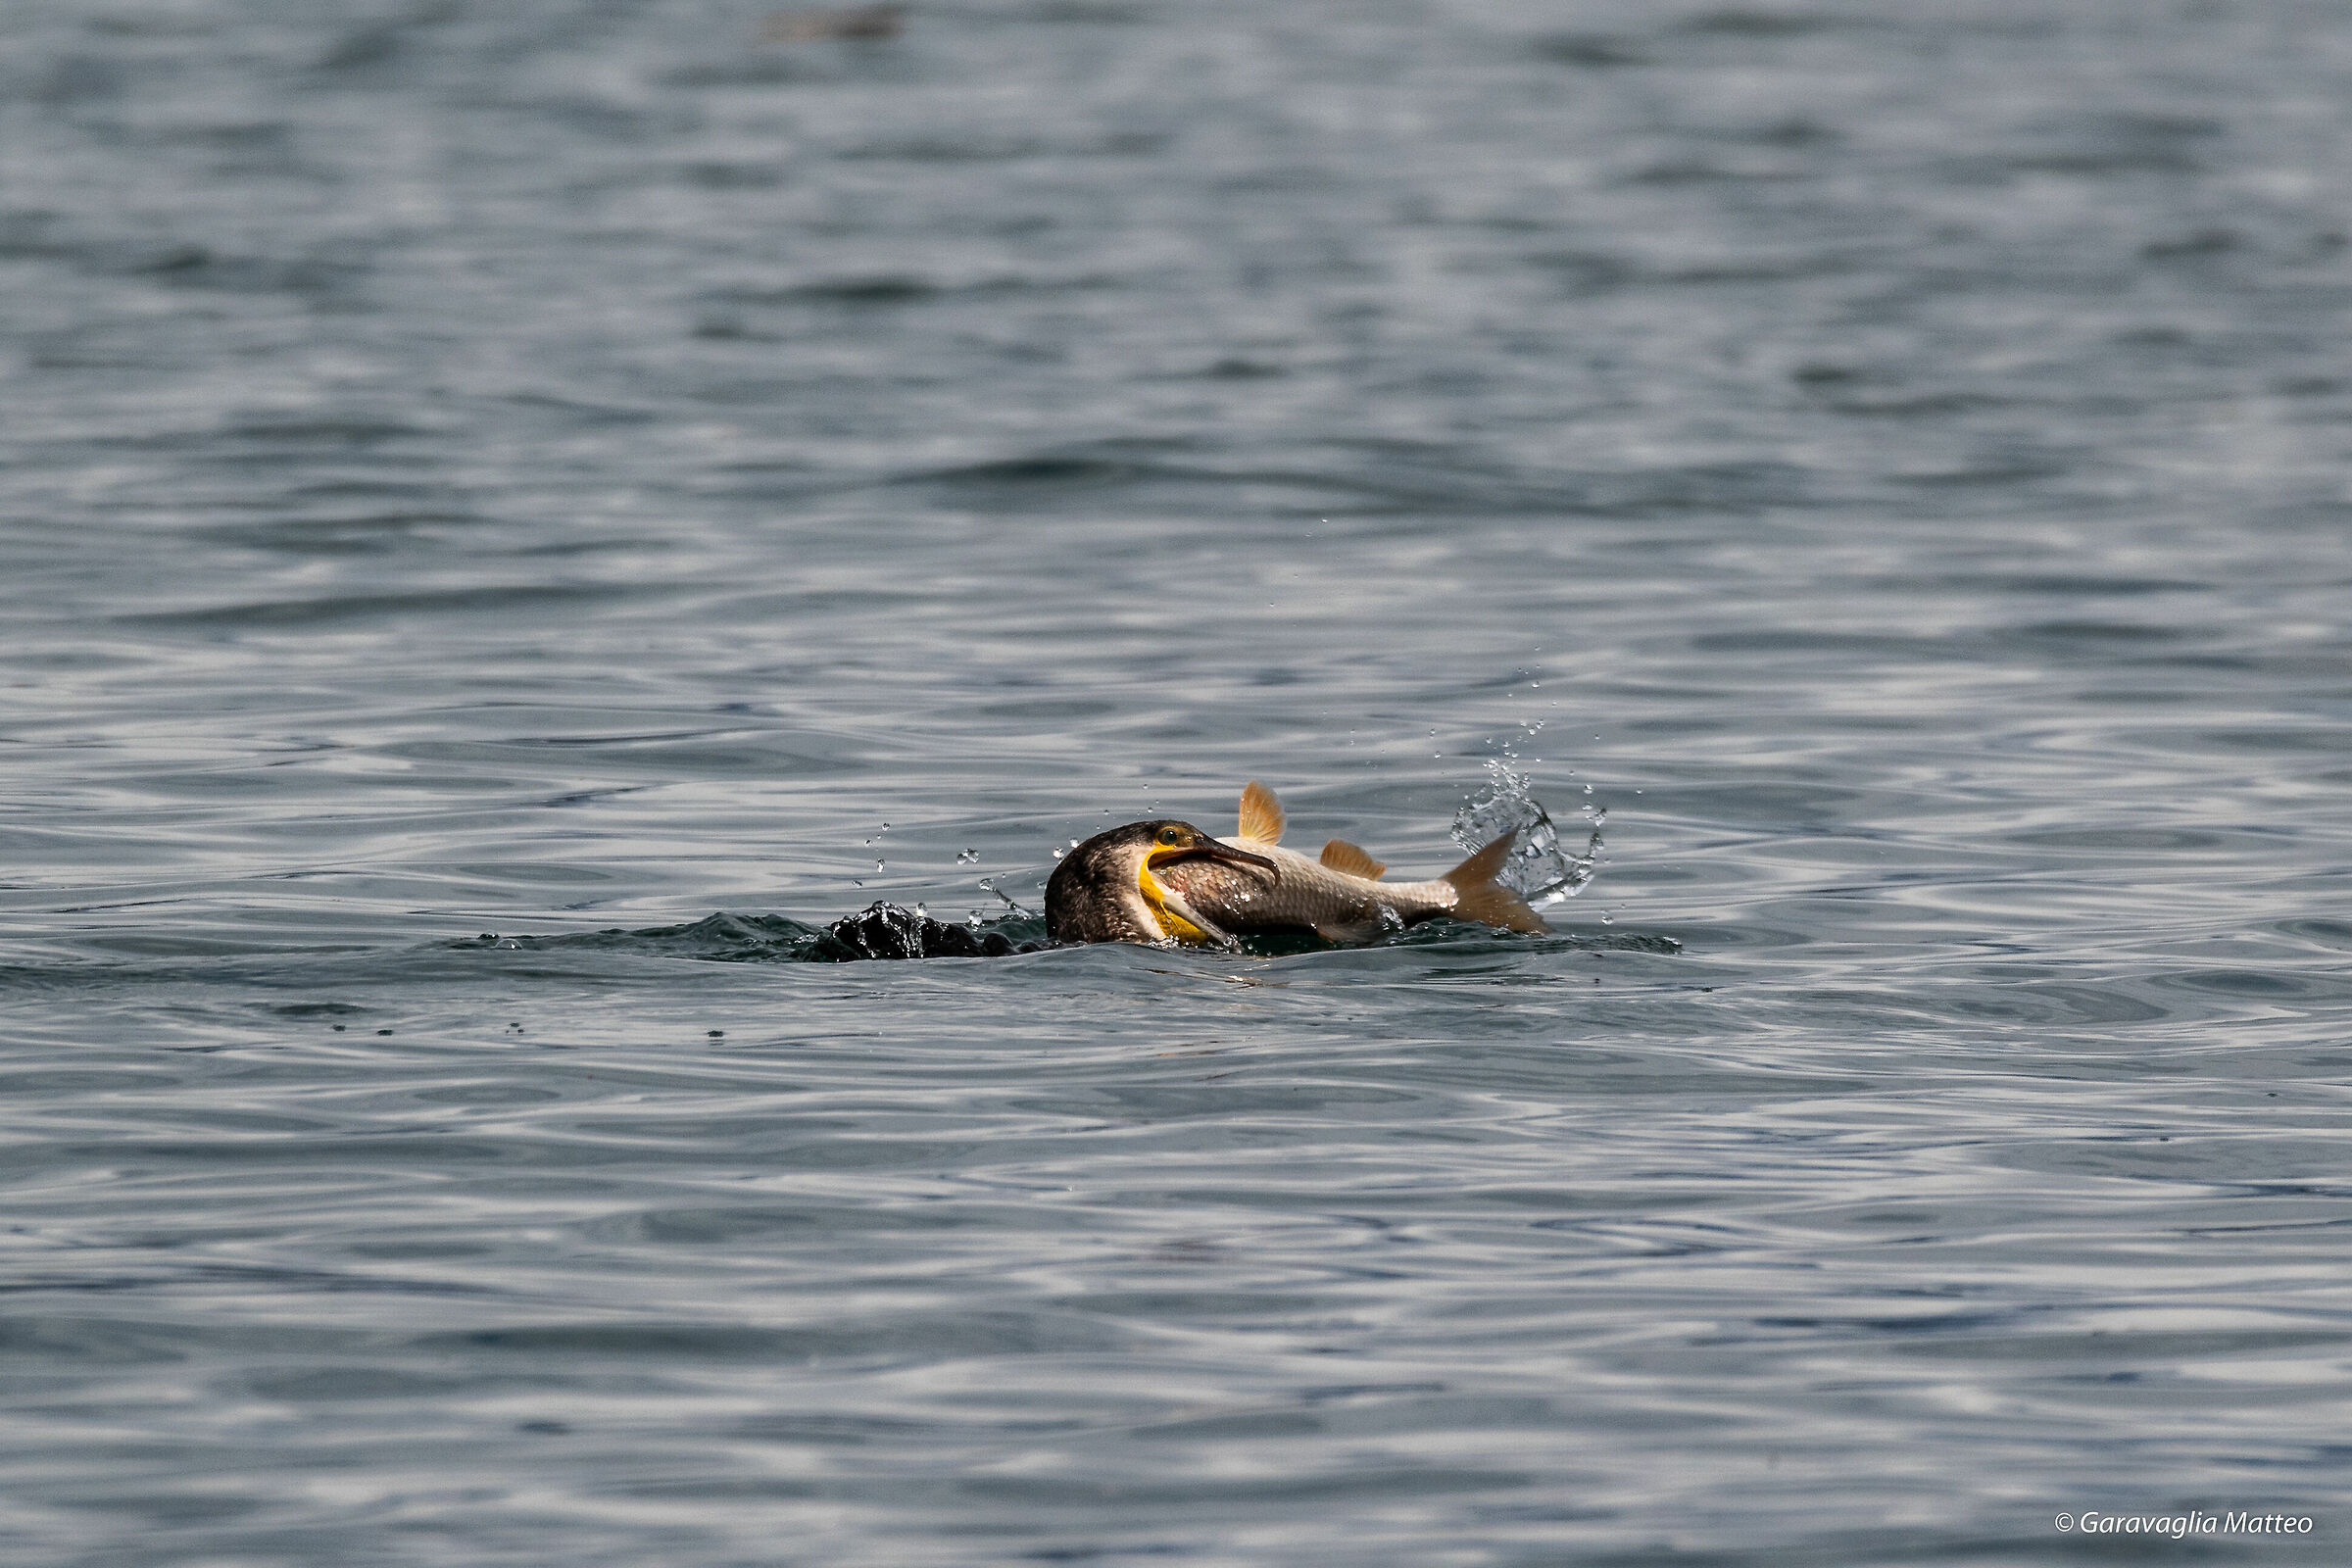 The battle between the cormorate and its prey...